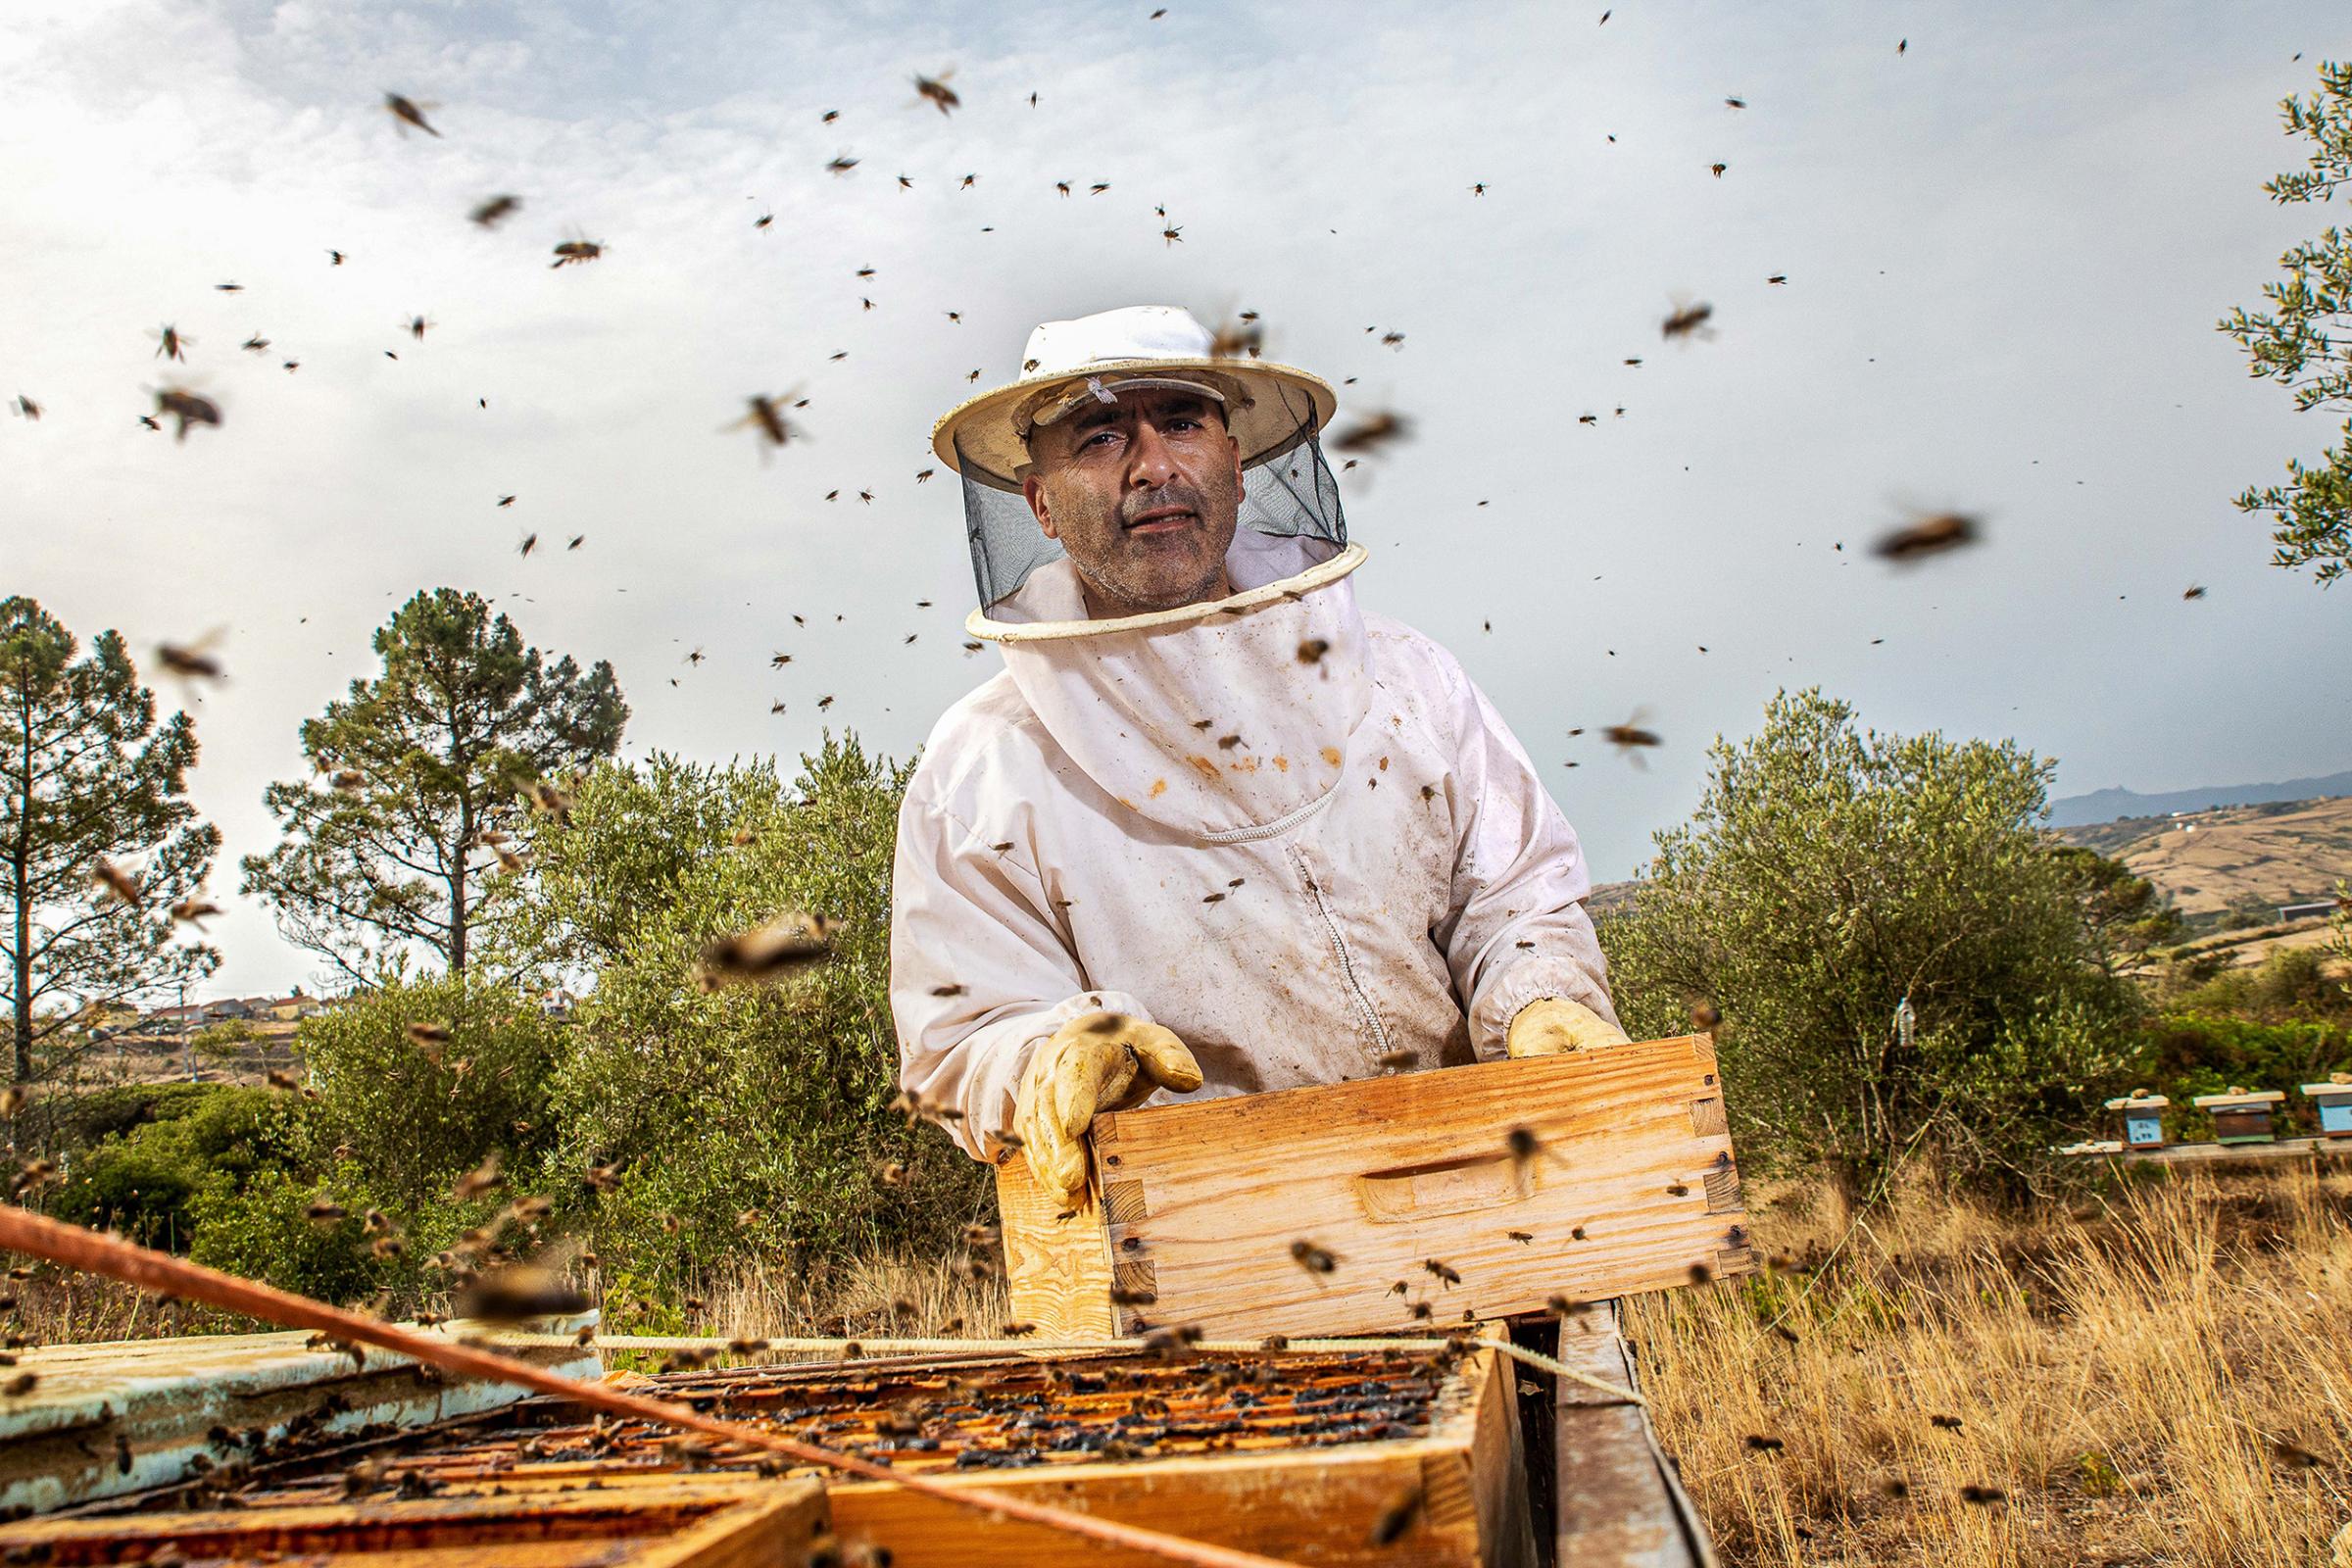 Leonardo, is a natural beekeeper from the Mafra region who runs a honey production company called Dlapmel in the West area.